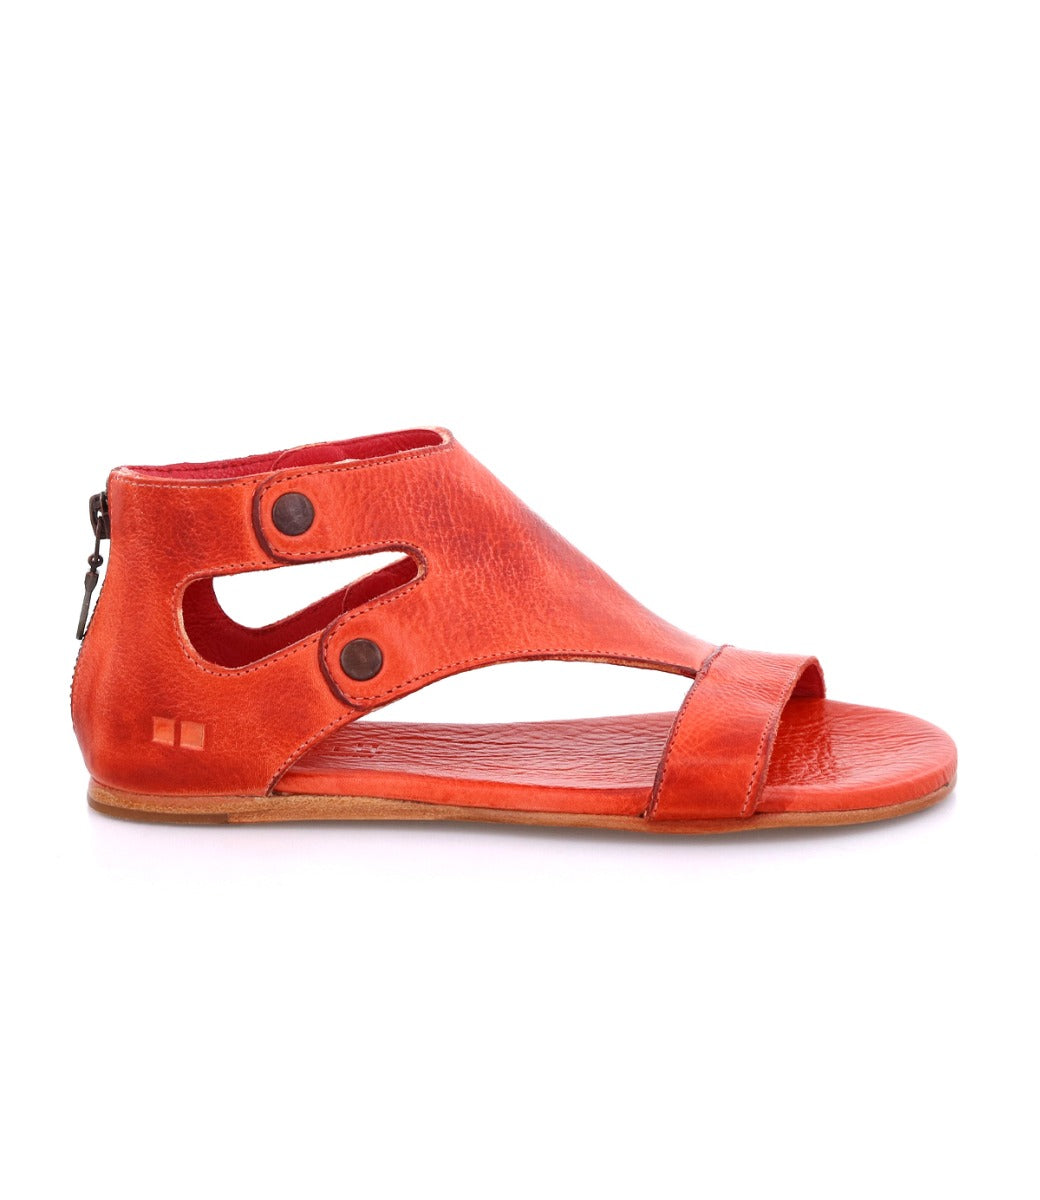 Bed Stu women's red leather Soto sandal.